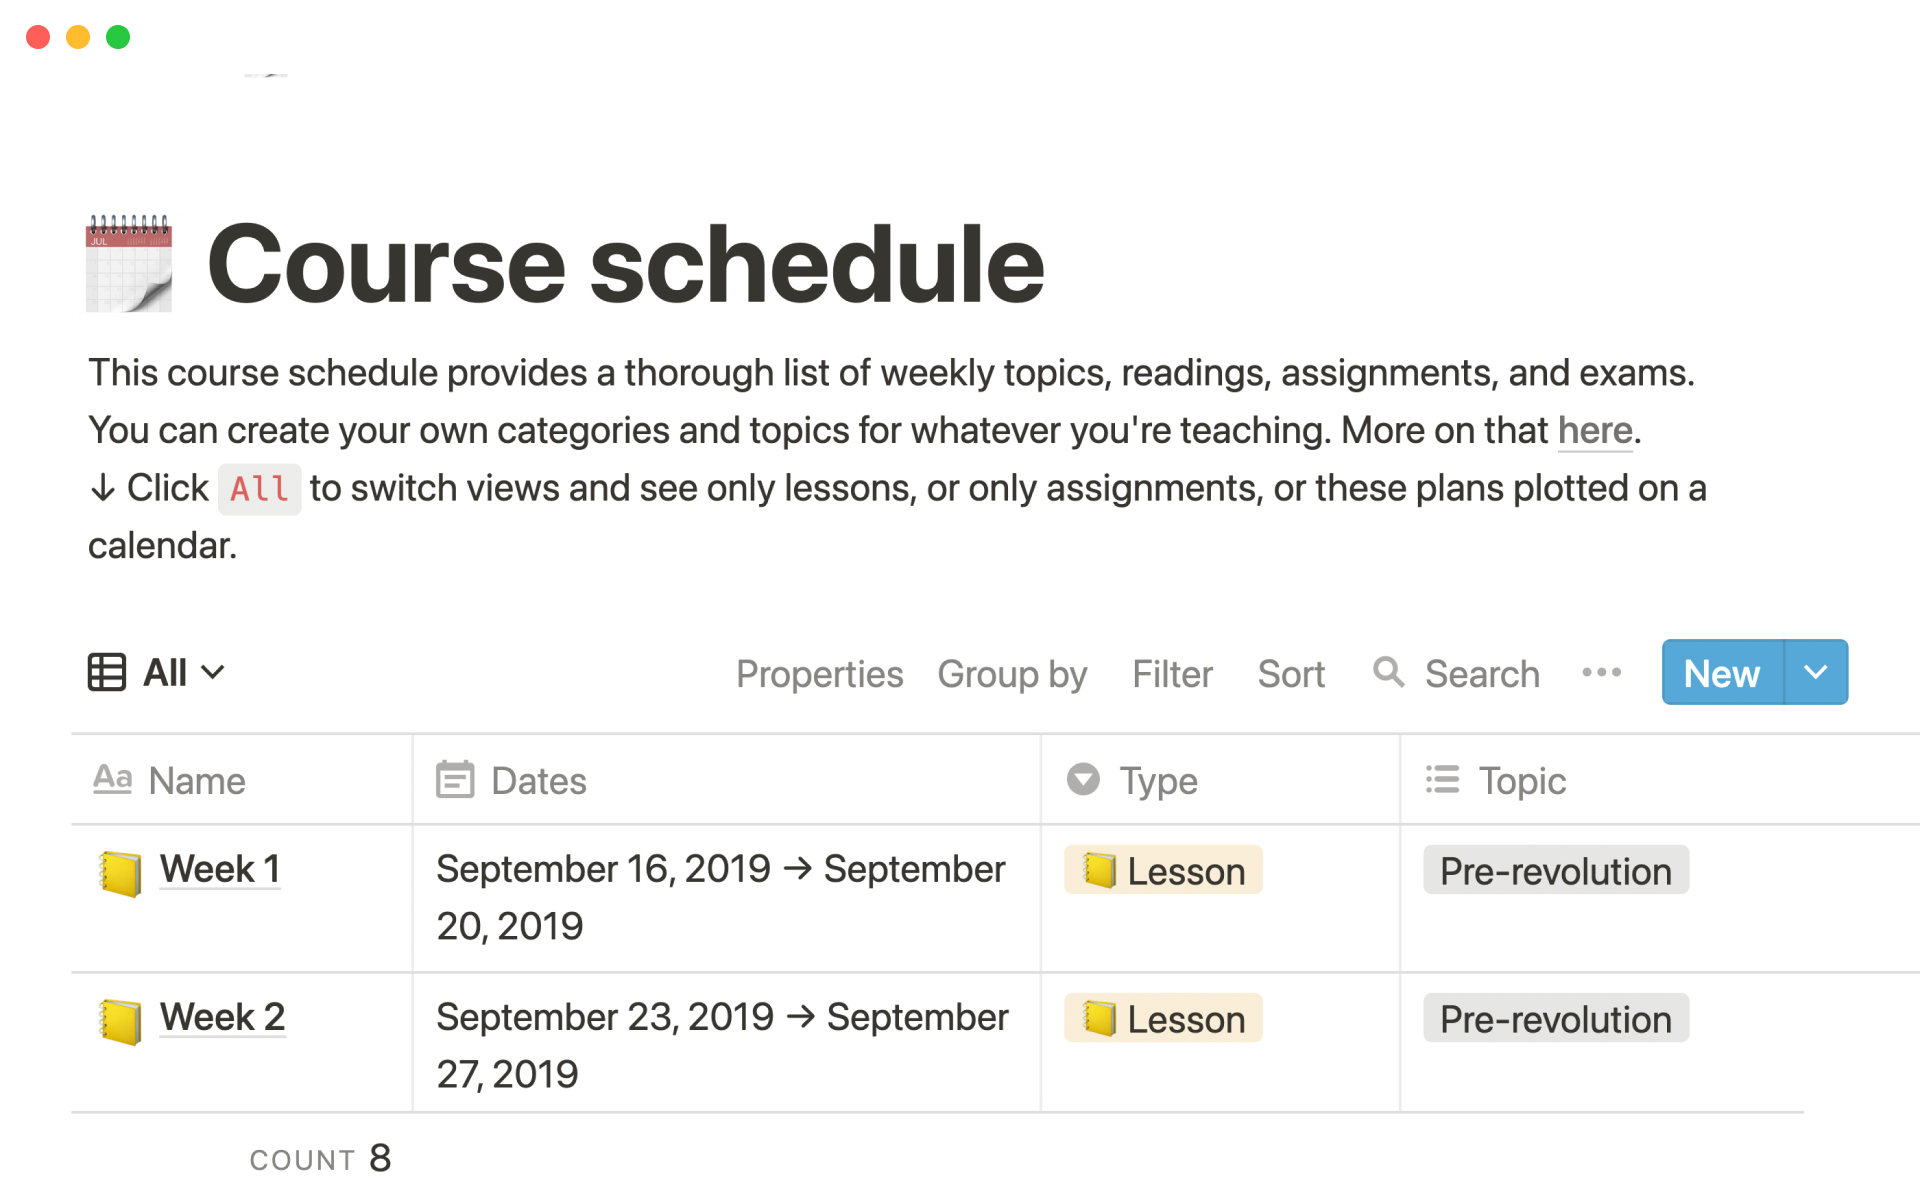 The desktop image for the Course schedule template